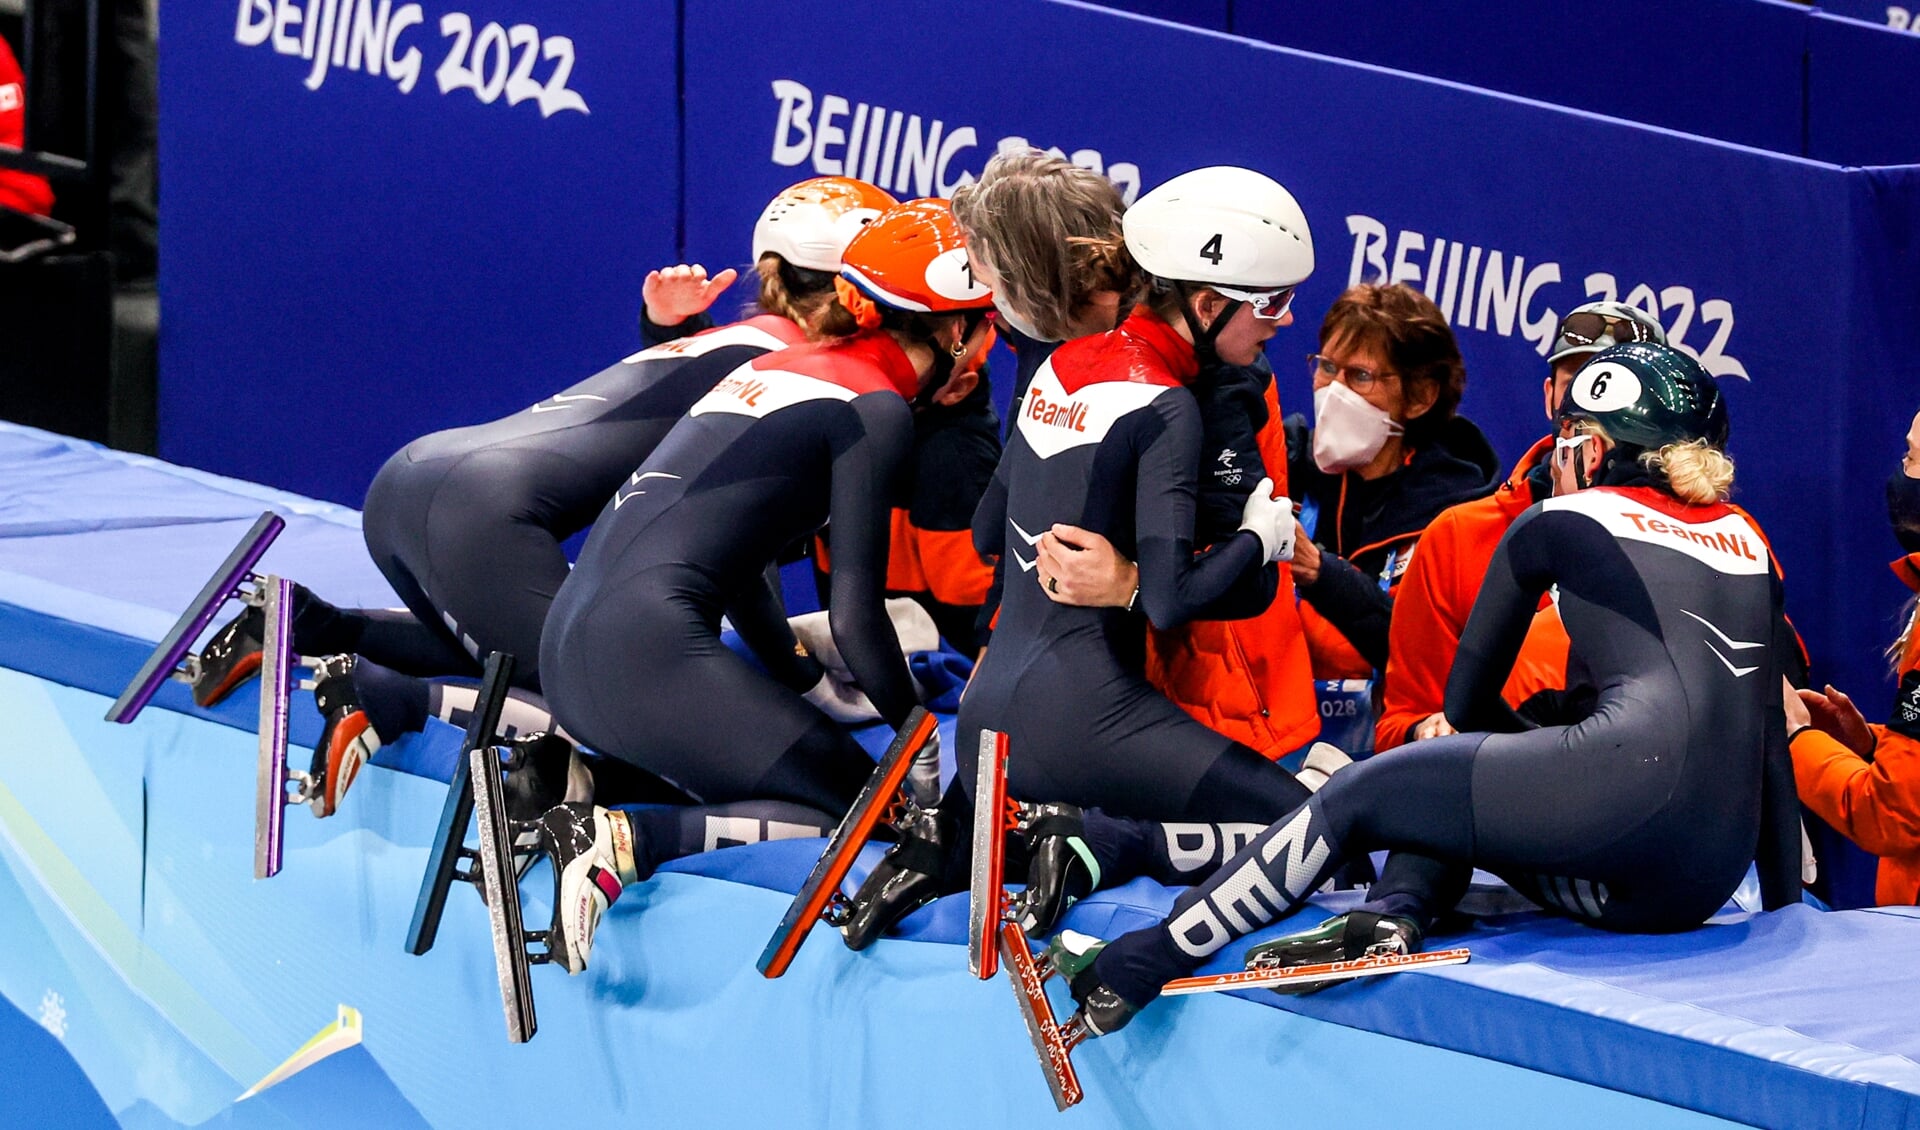 BEIJING, CHINA - FEBRUARY 13: Yara van Kerkhof of the Netherlands, Selma Poutsma of the Netherlands, Suzanne Schulting of the Netherlands, Xandra Velzeboer of the Netherlands celebrating competing on the Women's 3000m Relay during the Beijing 2022 Olympic Games at the Capital Indoor Stadium on February 13, 2022 in Beijing, China (Photo by Iris van den Broek/Orange Pictures) 